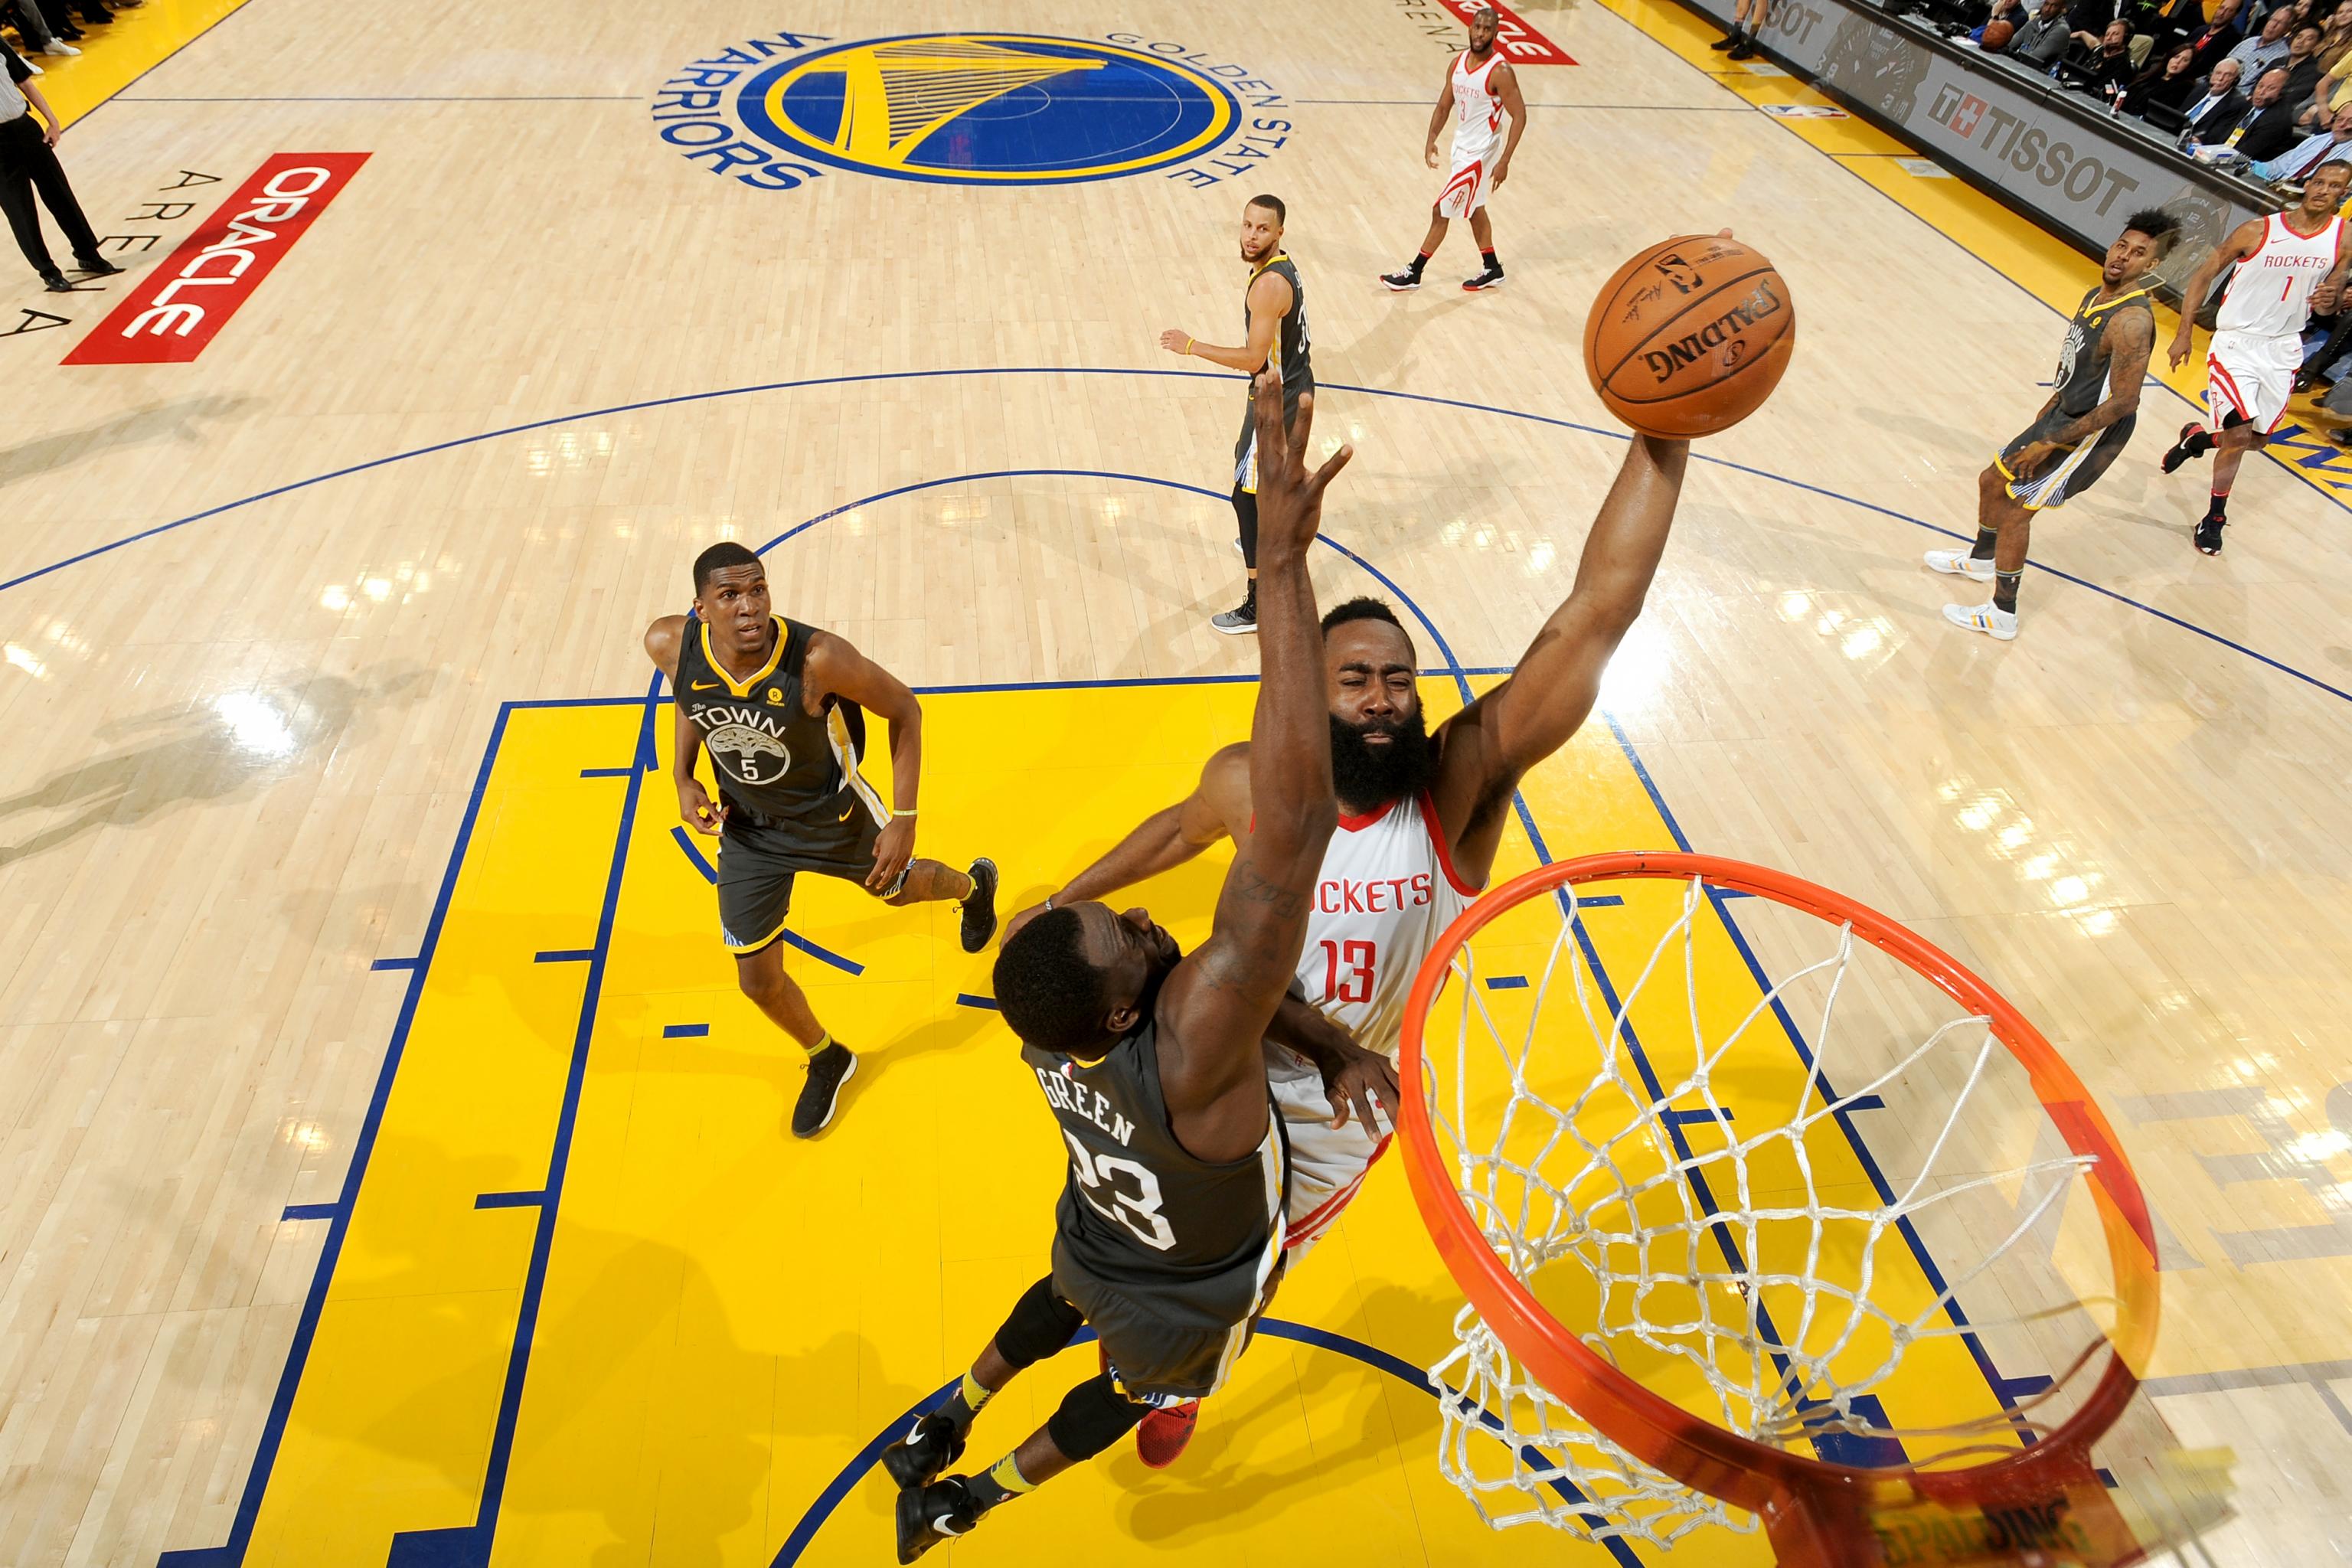 VIDEO: James Harden is a hero for dunking the life out of Draymond Green -  The Dream Shake